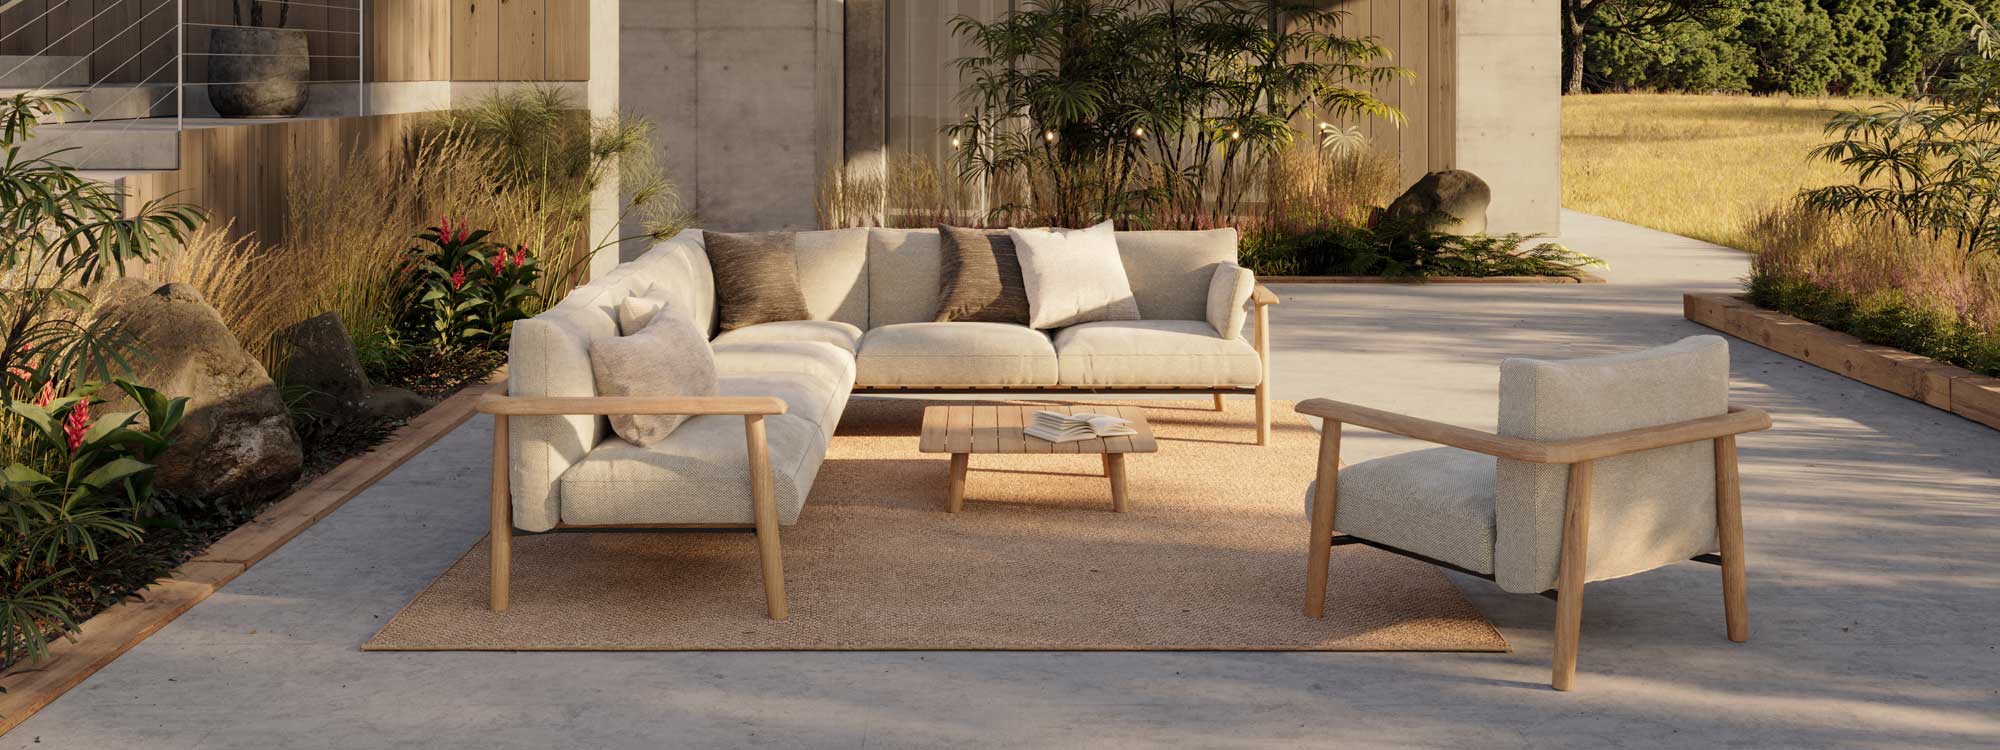 Image of Royal Botania Mambo teak garden sofa on poured concrete terrace, with exotic plants and prairie grassland in the background